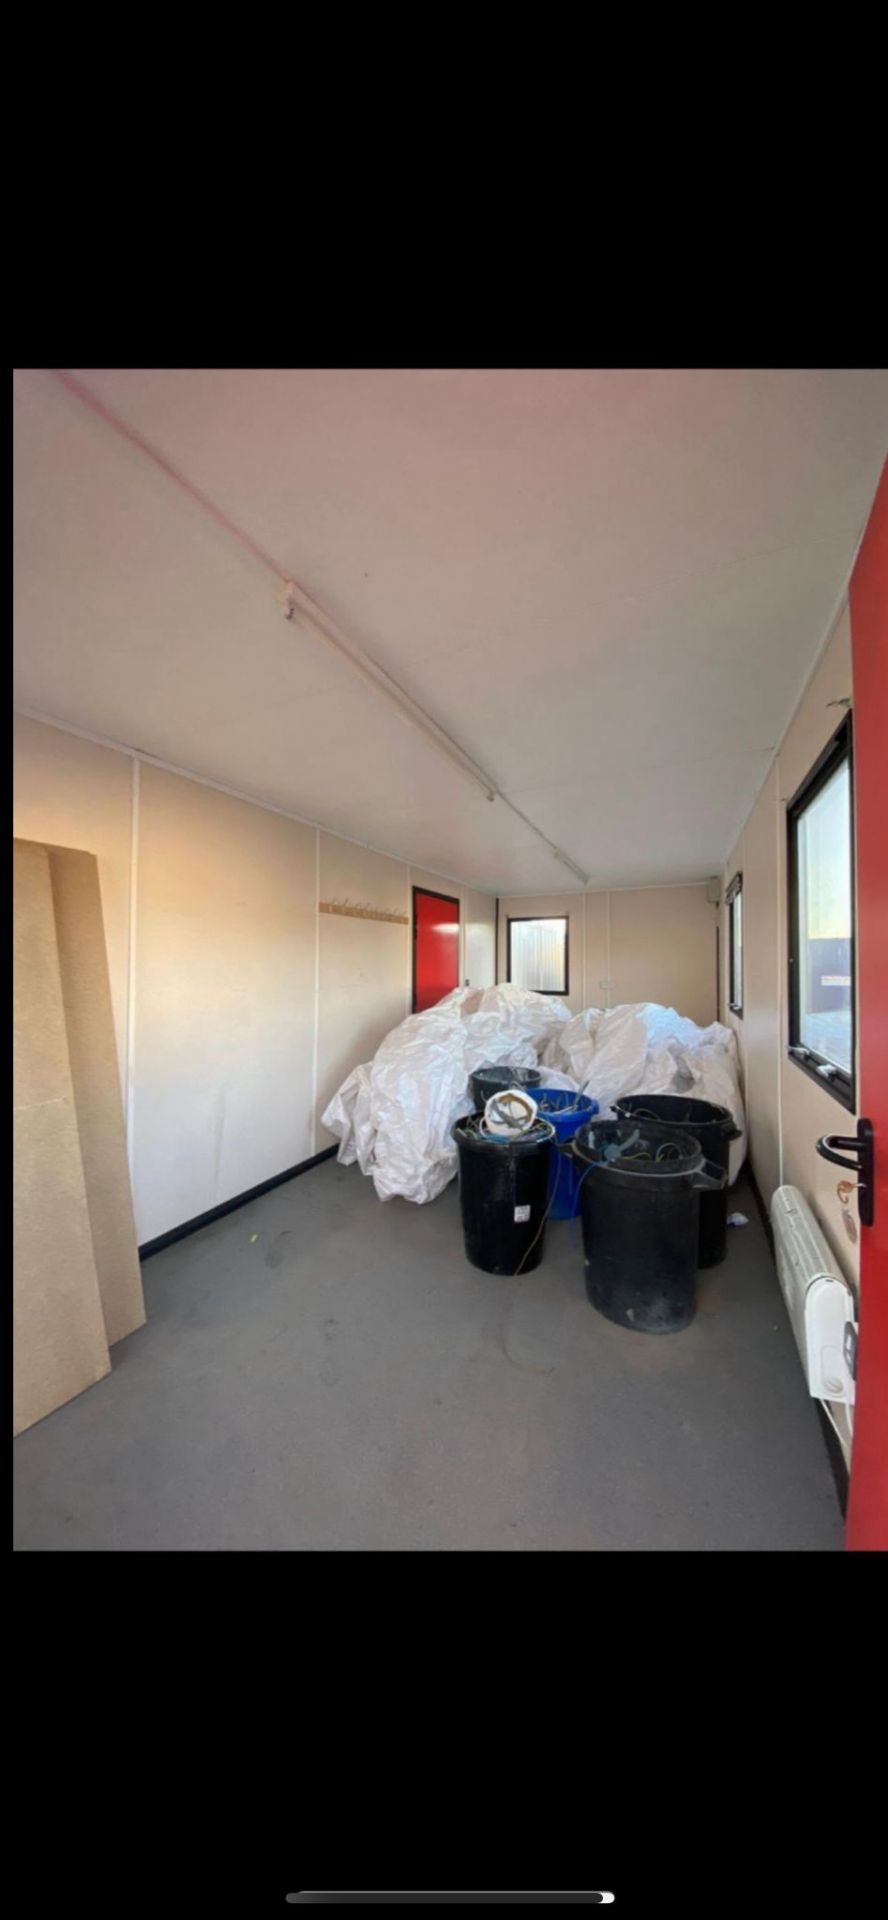 2 x 20ft site offices cabins welfare containers - Image 4 of 6